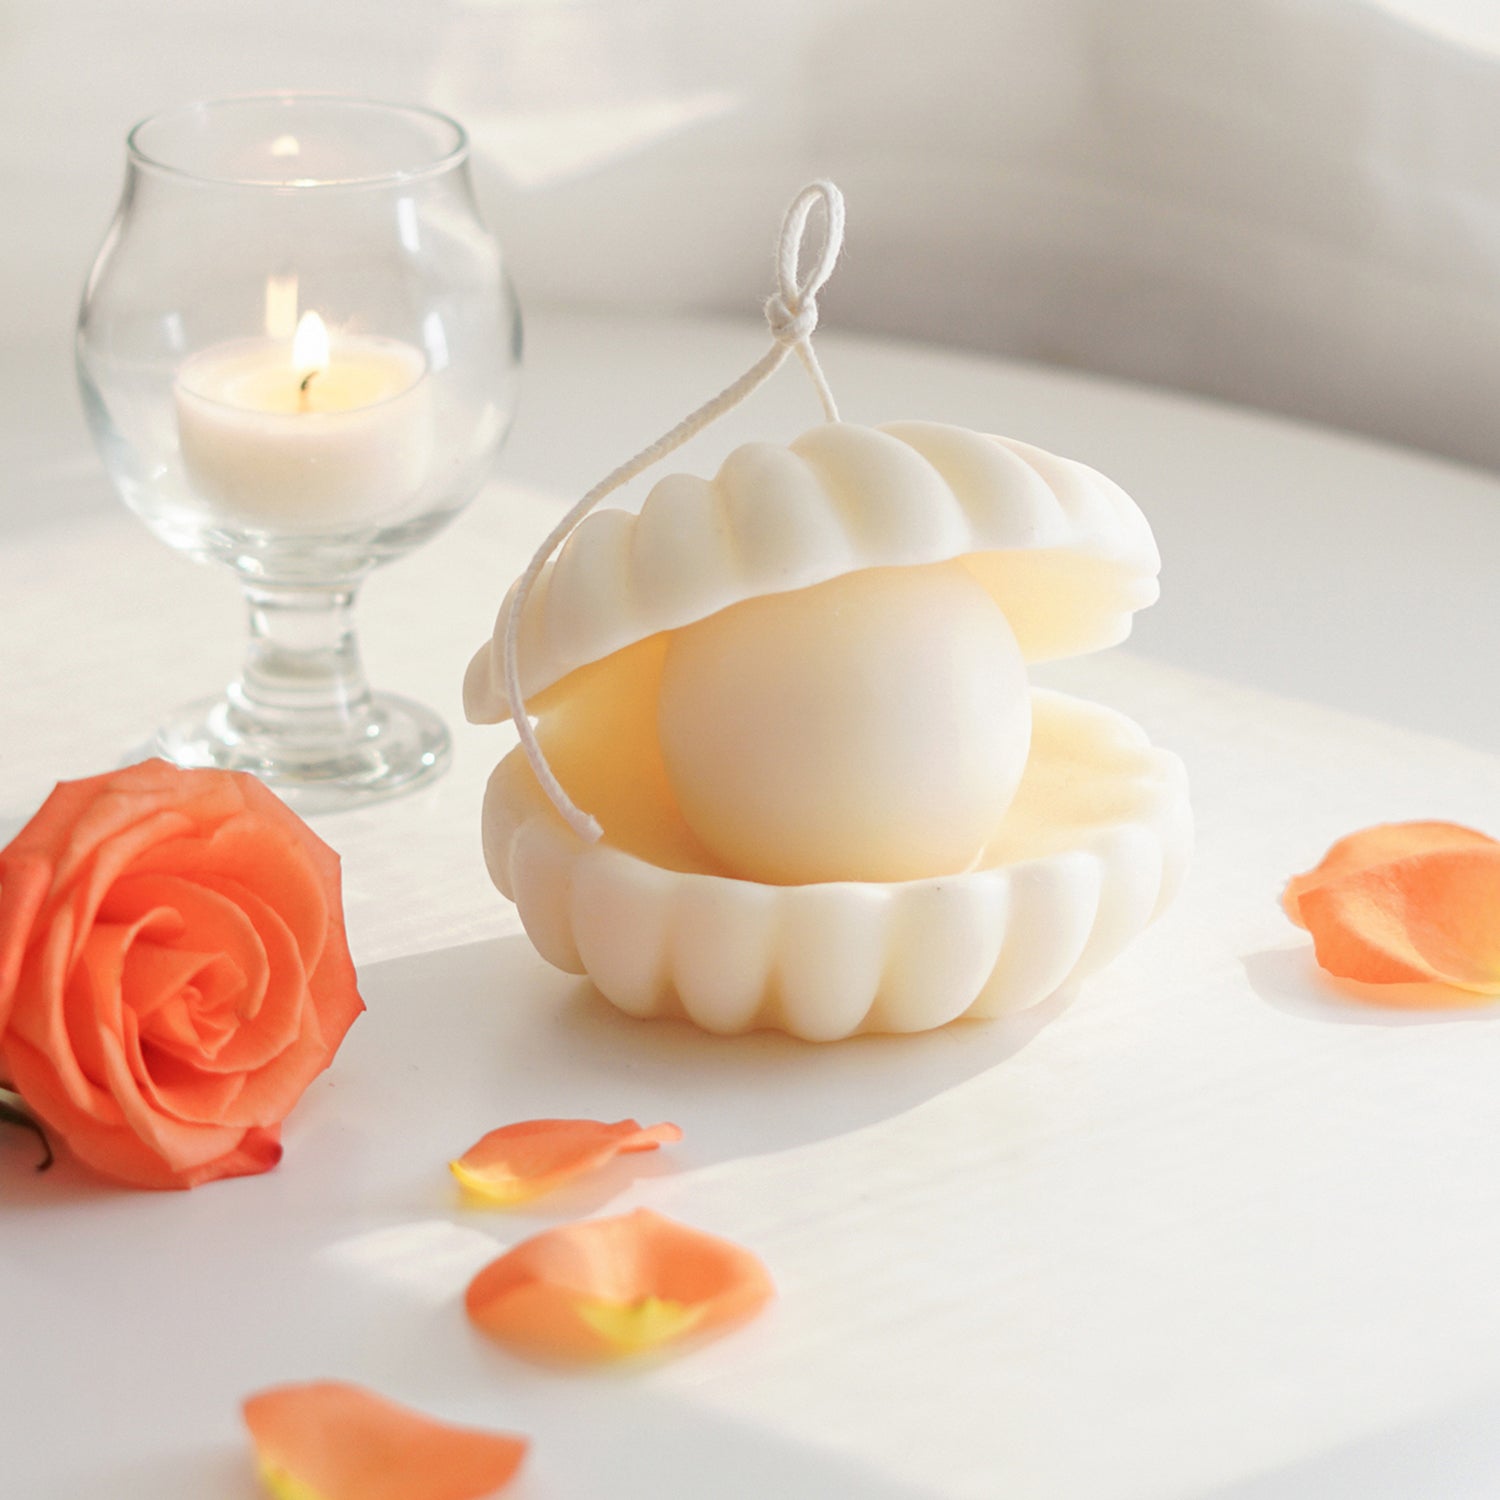 shell pearl shape soy pillar candle with long wick, orange rose and rose petals, and a lit tealight candle in a mini glass